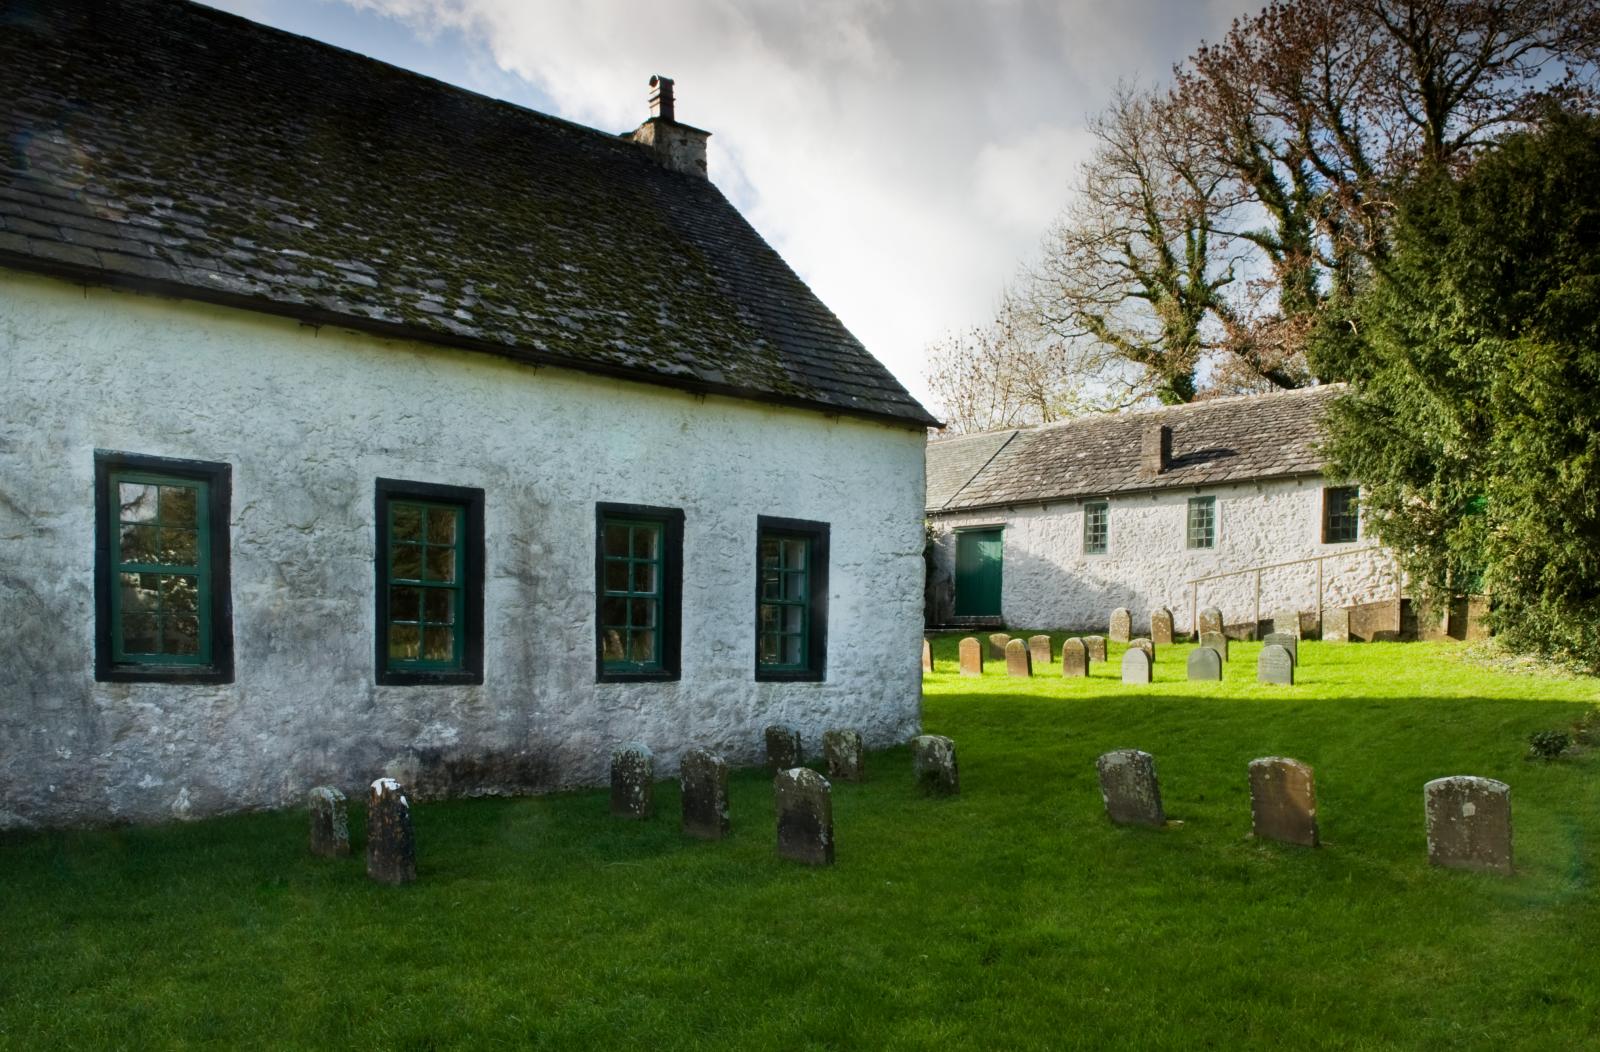 Exterior shot of Pardshaw meeting house with white walls and green window frames in a burial ground.